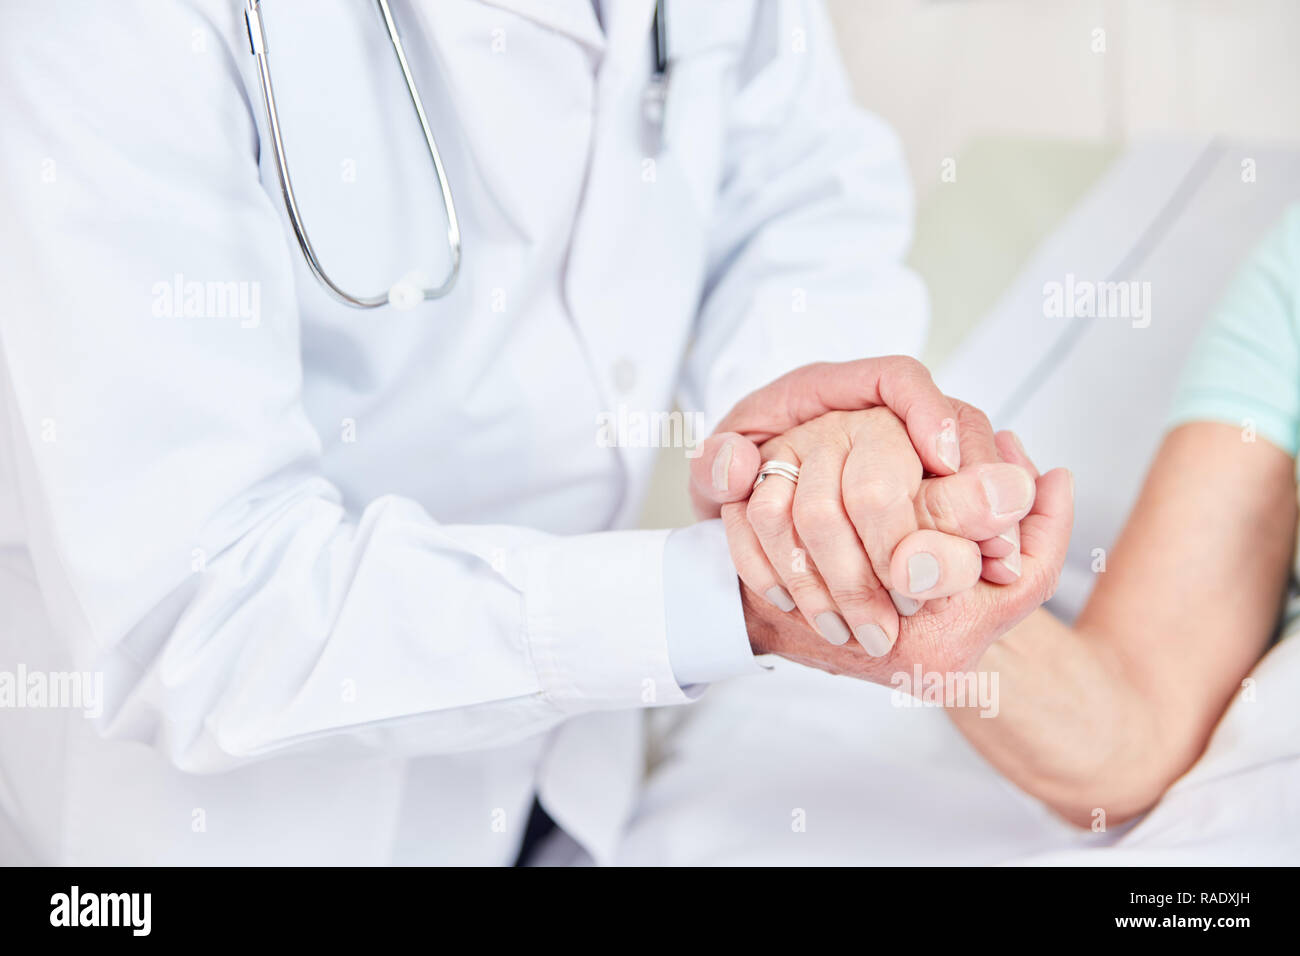 Doctor holds the hand of a patient as a sign of comfort and care Stock Photo